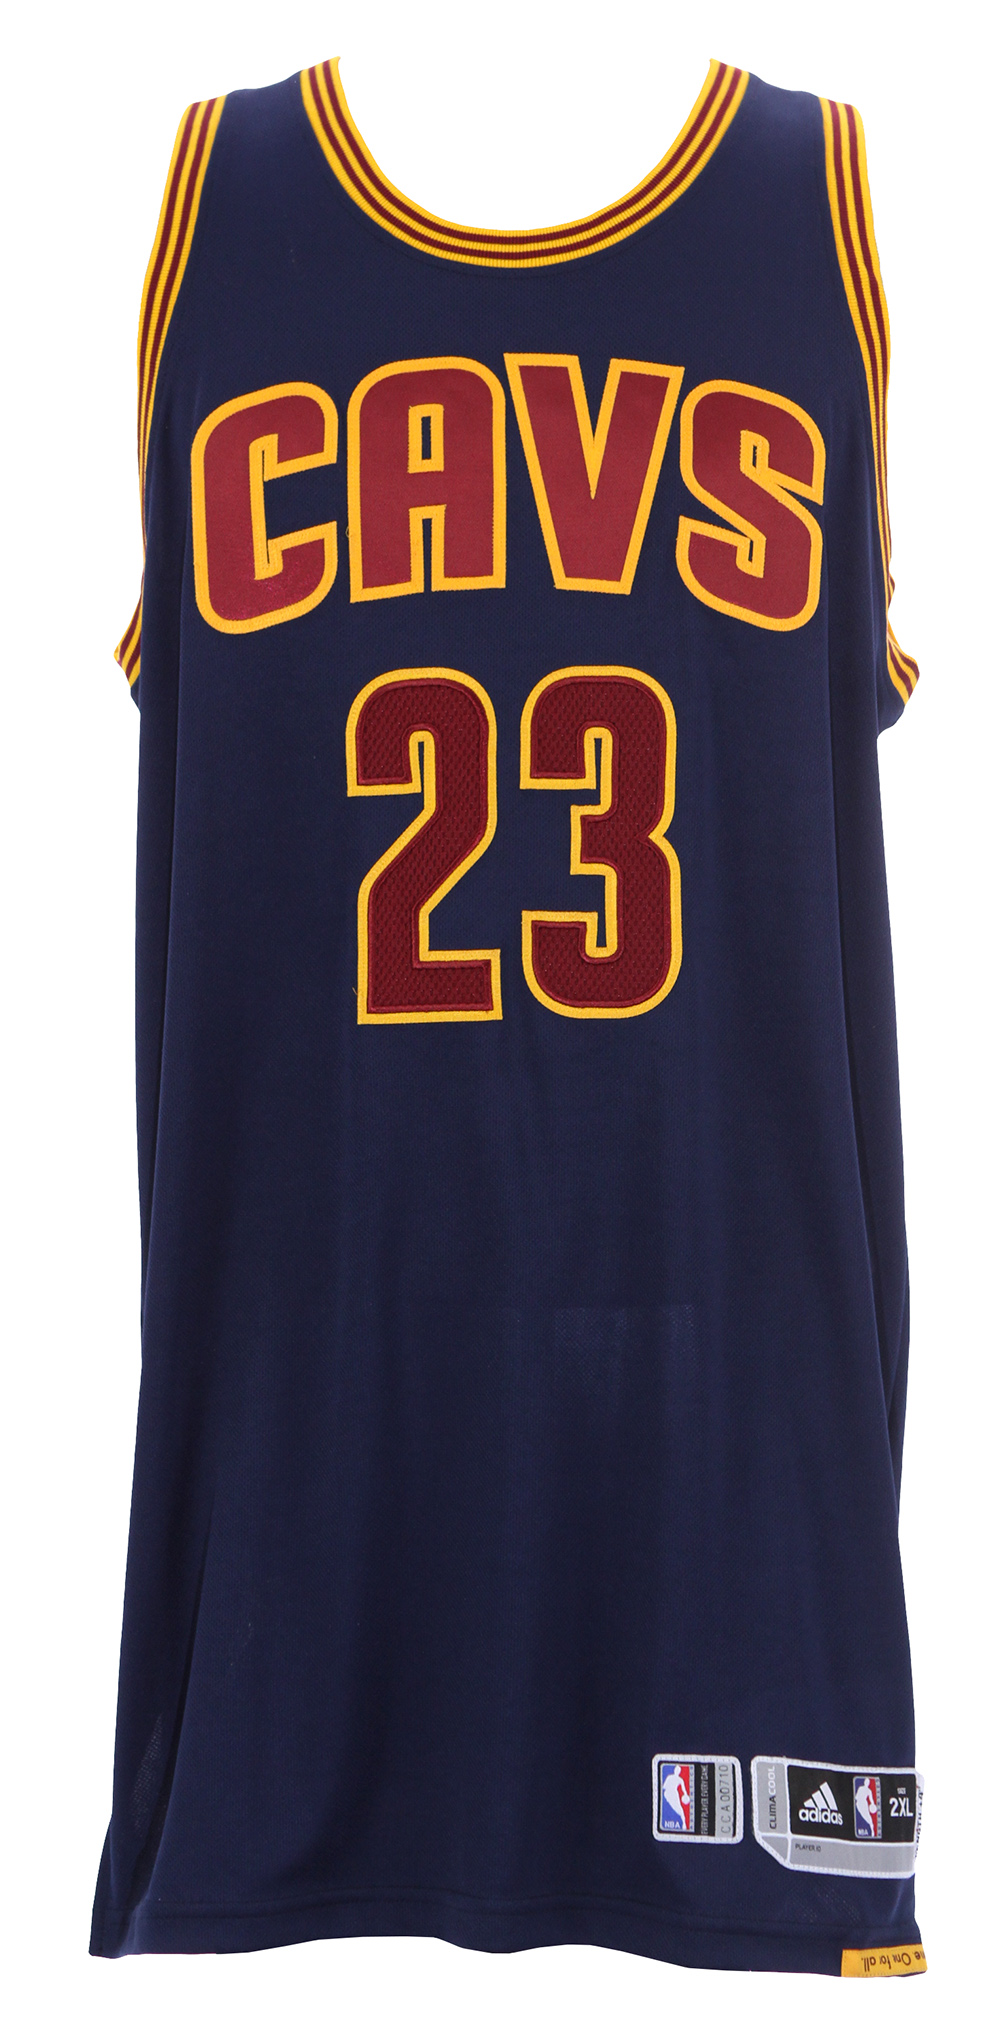 cleveland cavaliers road jersey